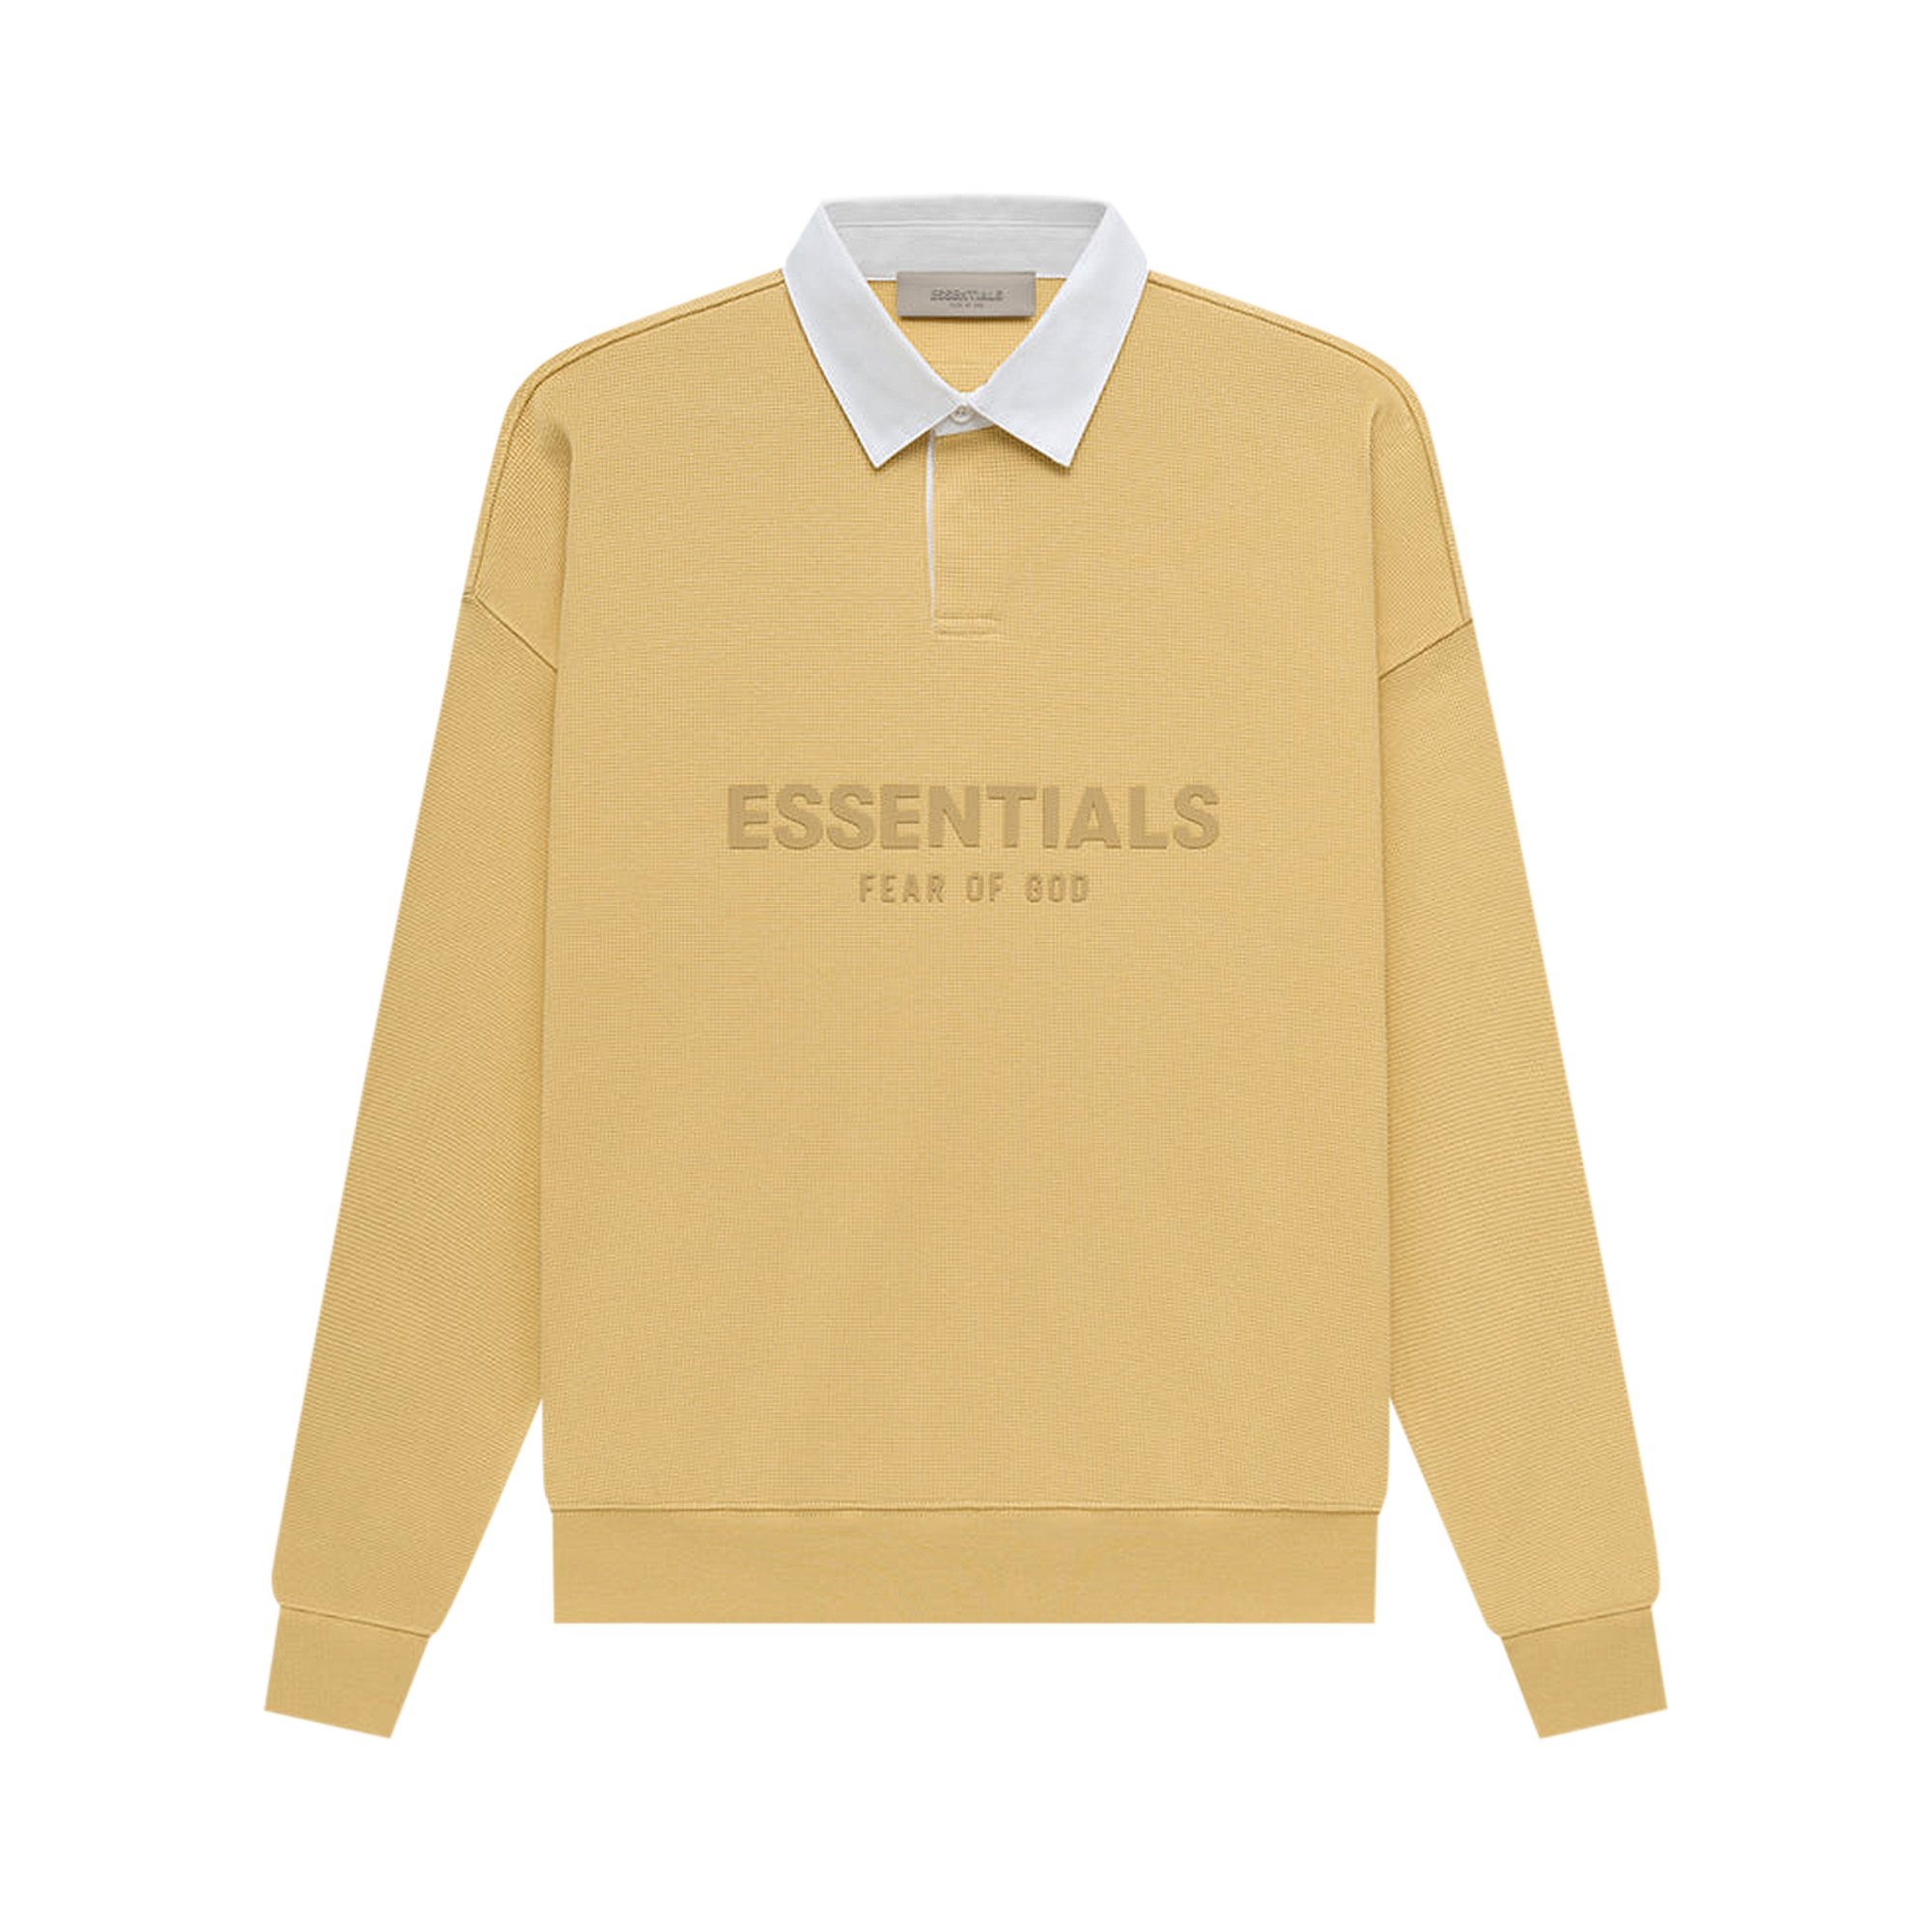 Buy Fear of God Essentials Waffle Henley Rugby 'Light Tuscan